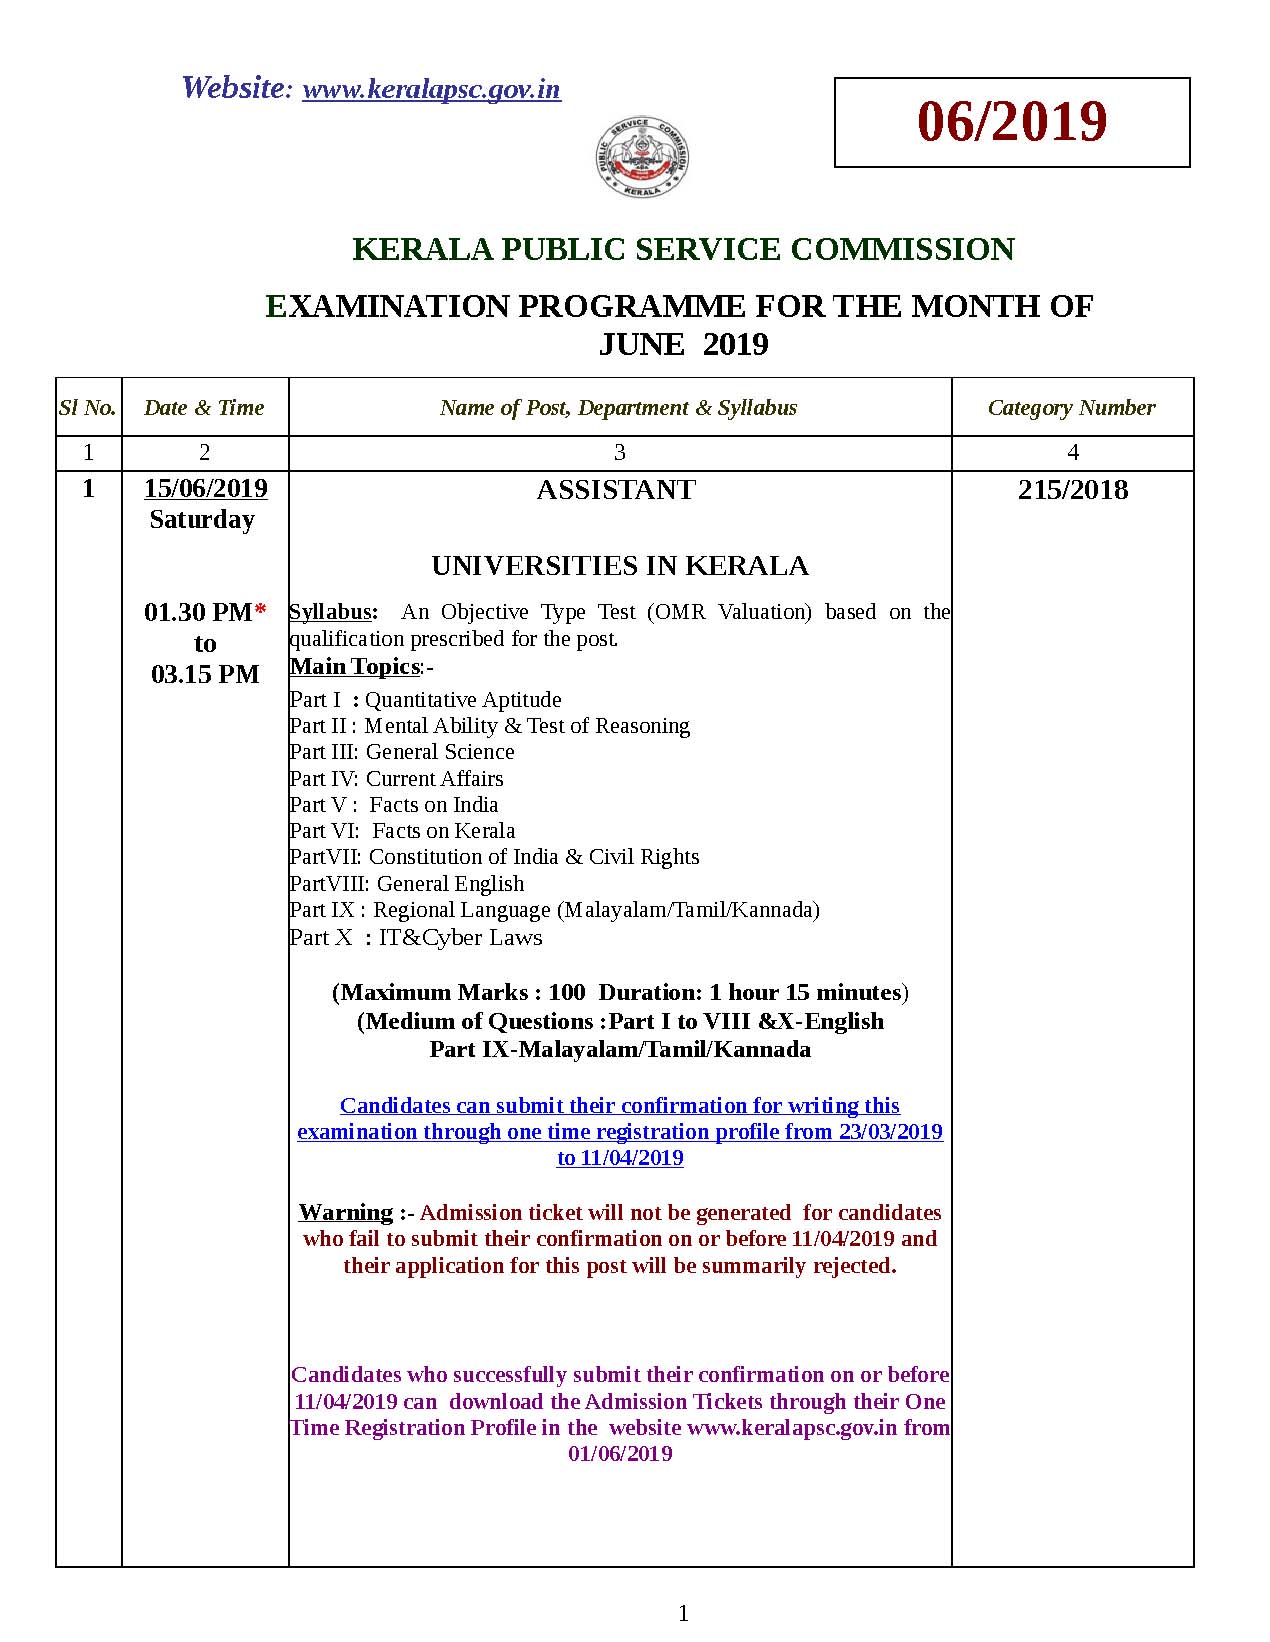 KPSC Examination Programme For The Month Of June 2019 - Notification Image 1